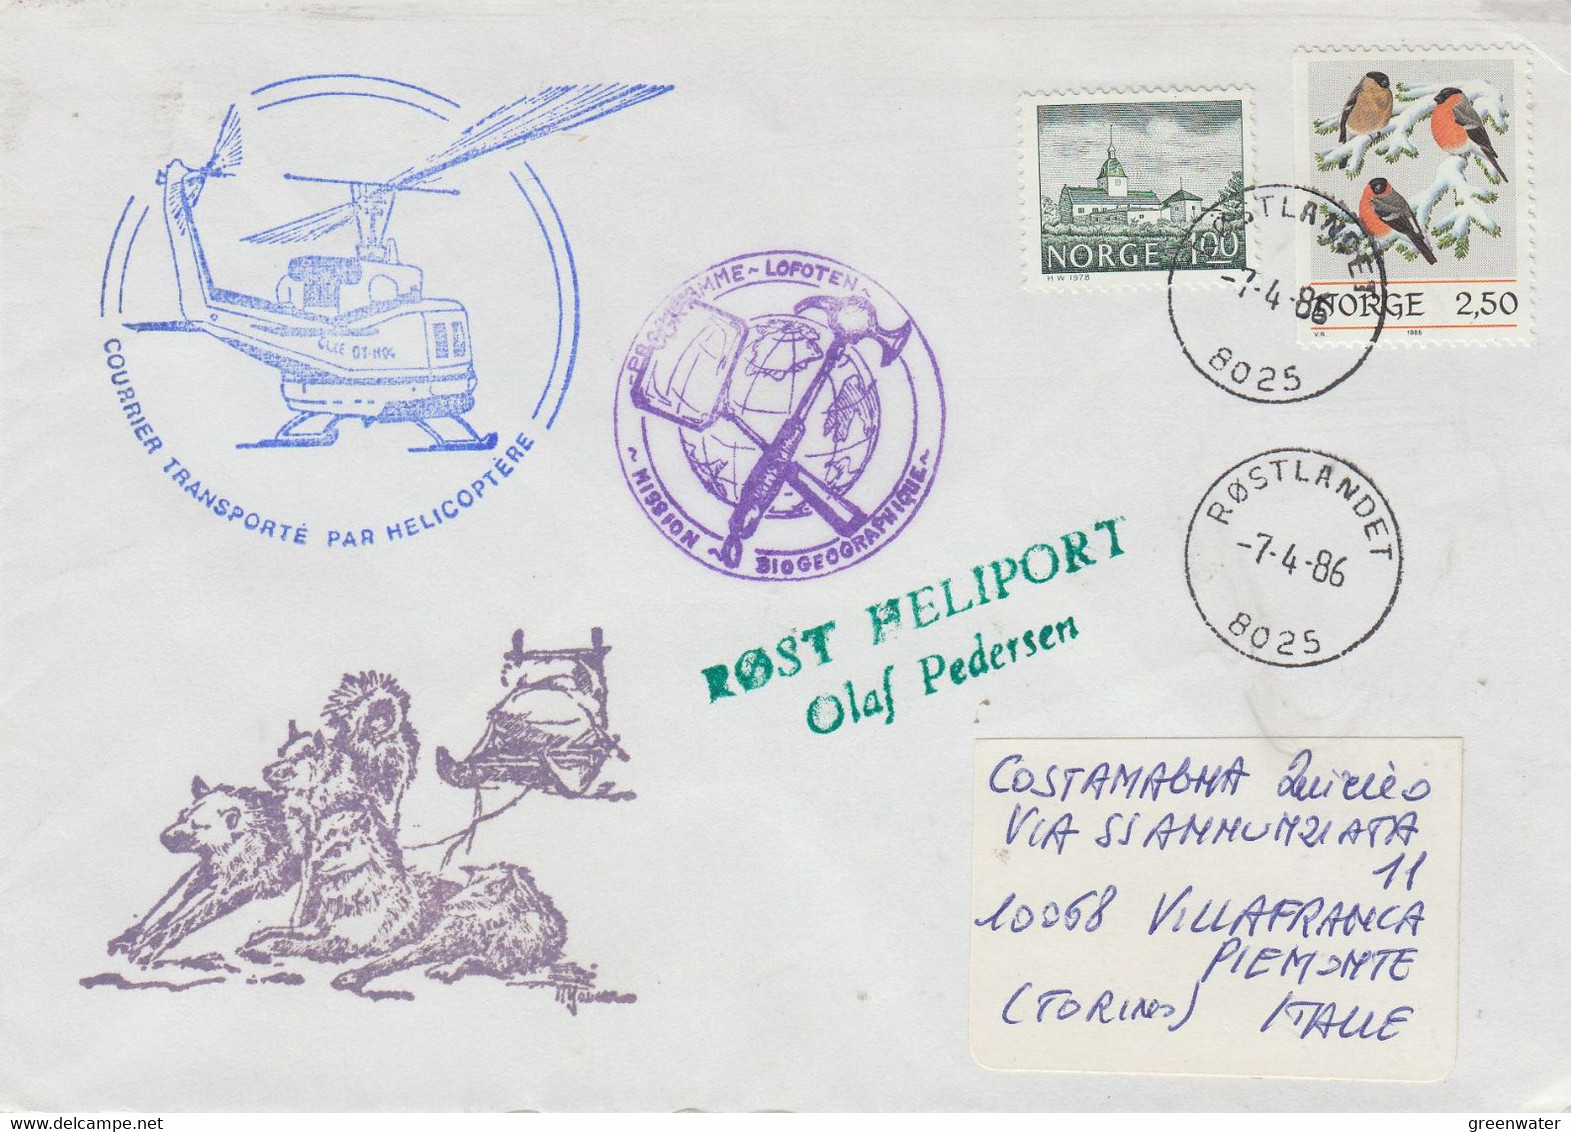 Norway 1986 Mission Geographique Rost Heliport Cover Ca Rostlandet 7-4-1986 (NW202) - Research Programs